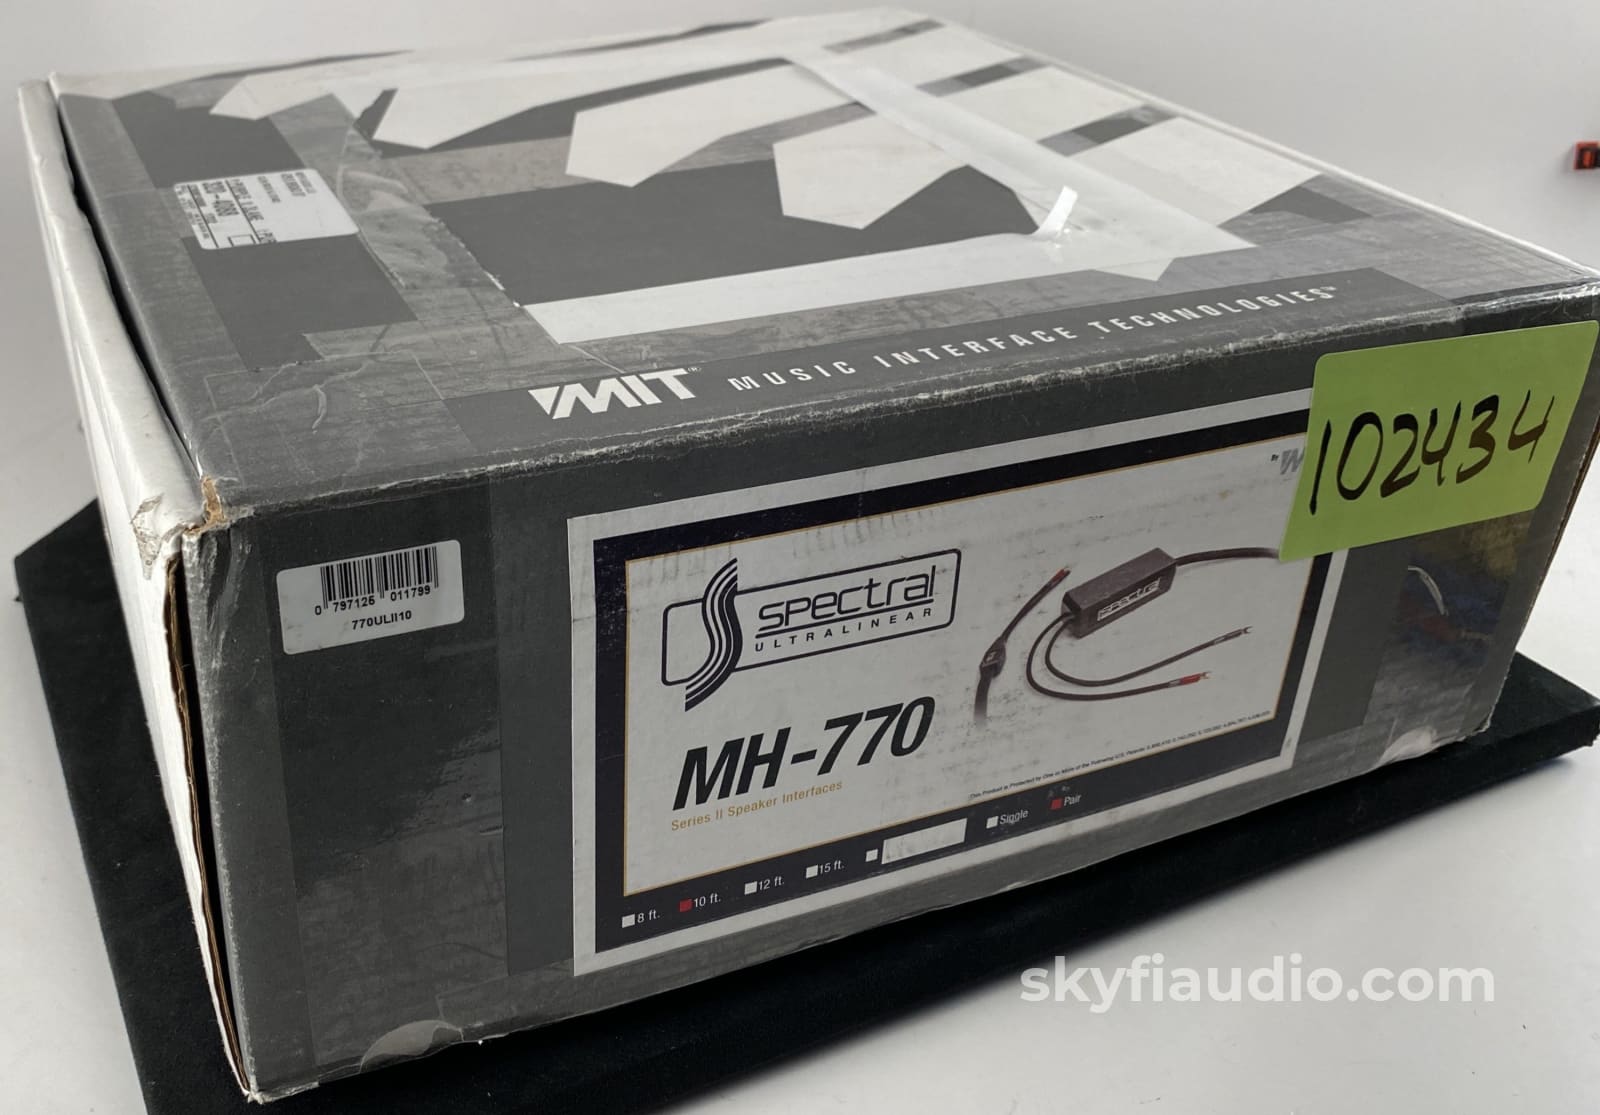 Mit Spectral Mh-770 Series Ii Reference Speaker Cables - Boxed! 10